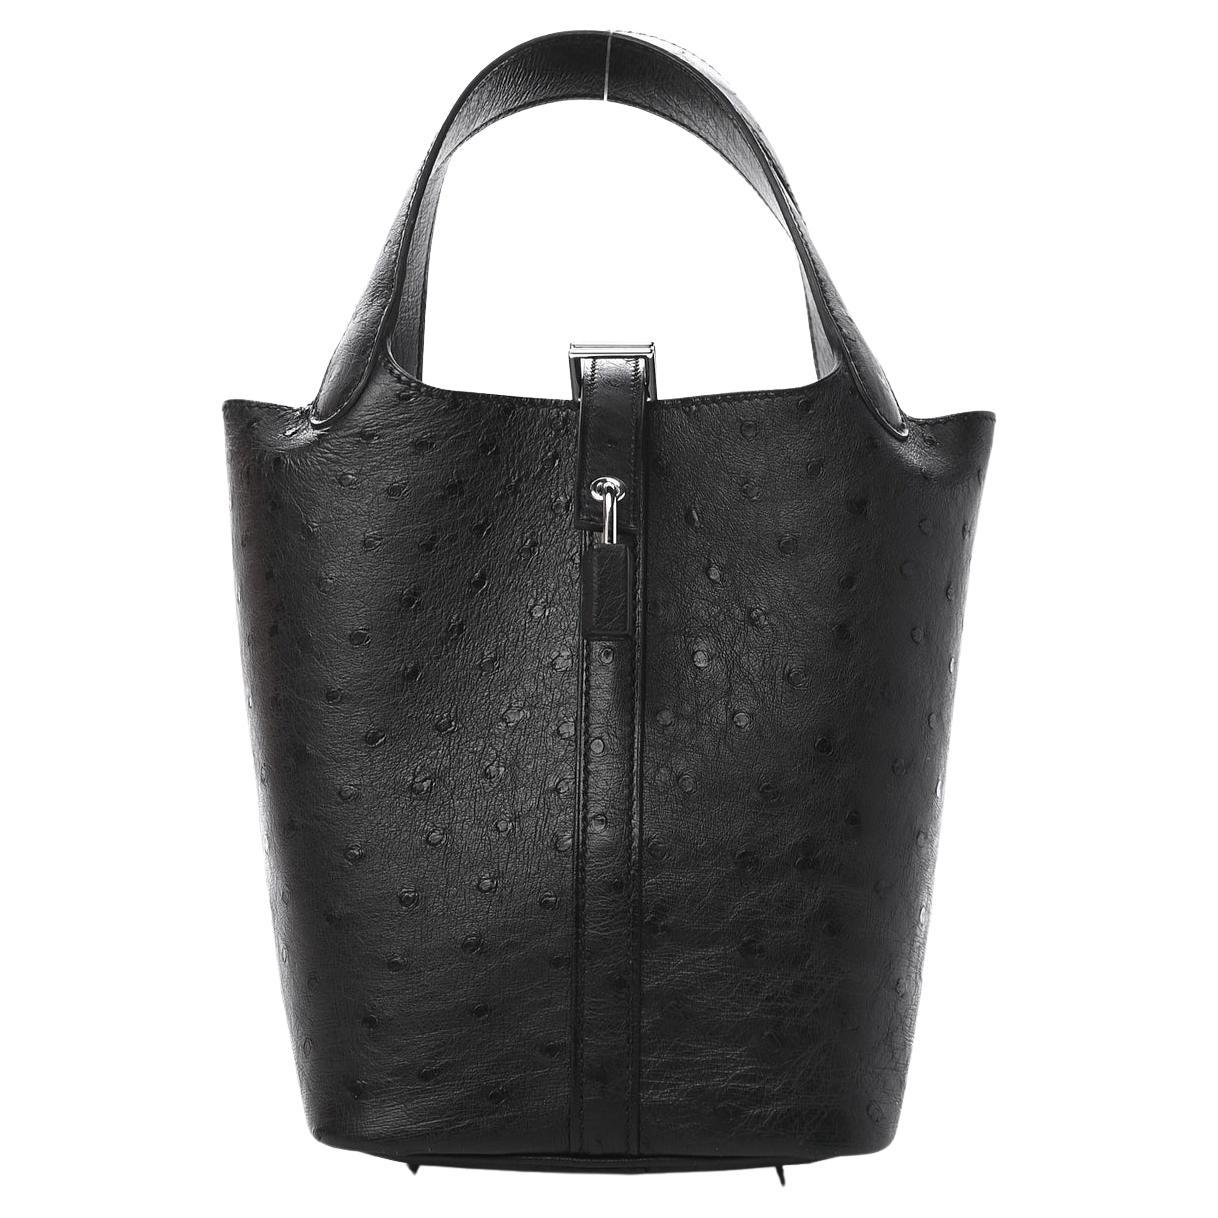 HERMES NEW Black Picotin 18 Ostrich Exotic Palladium Small Top Handle Tote Bag 